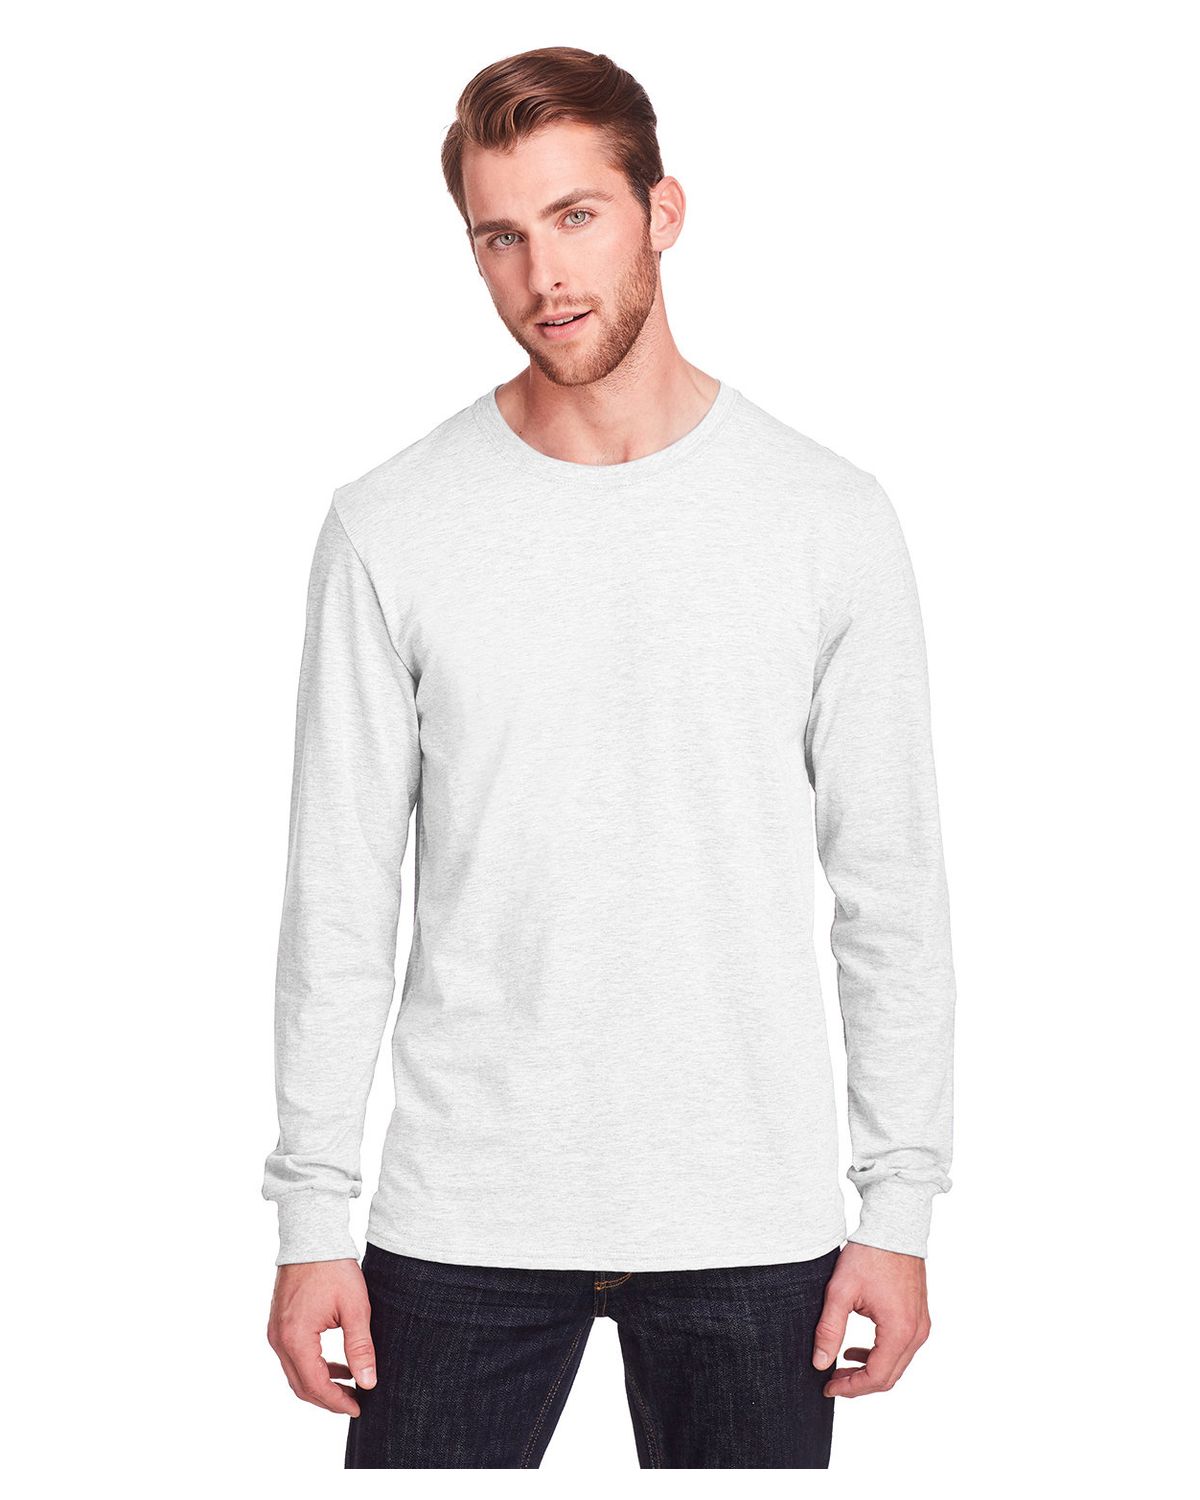 'Fruit of the Loom IC47LSR Adult Iconic Long Sleeve T Shirt'